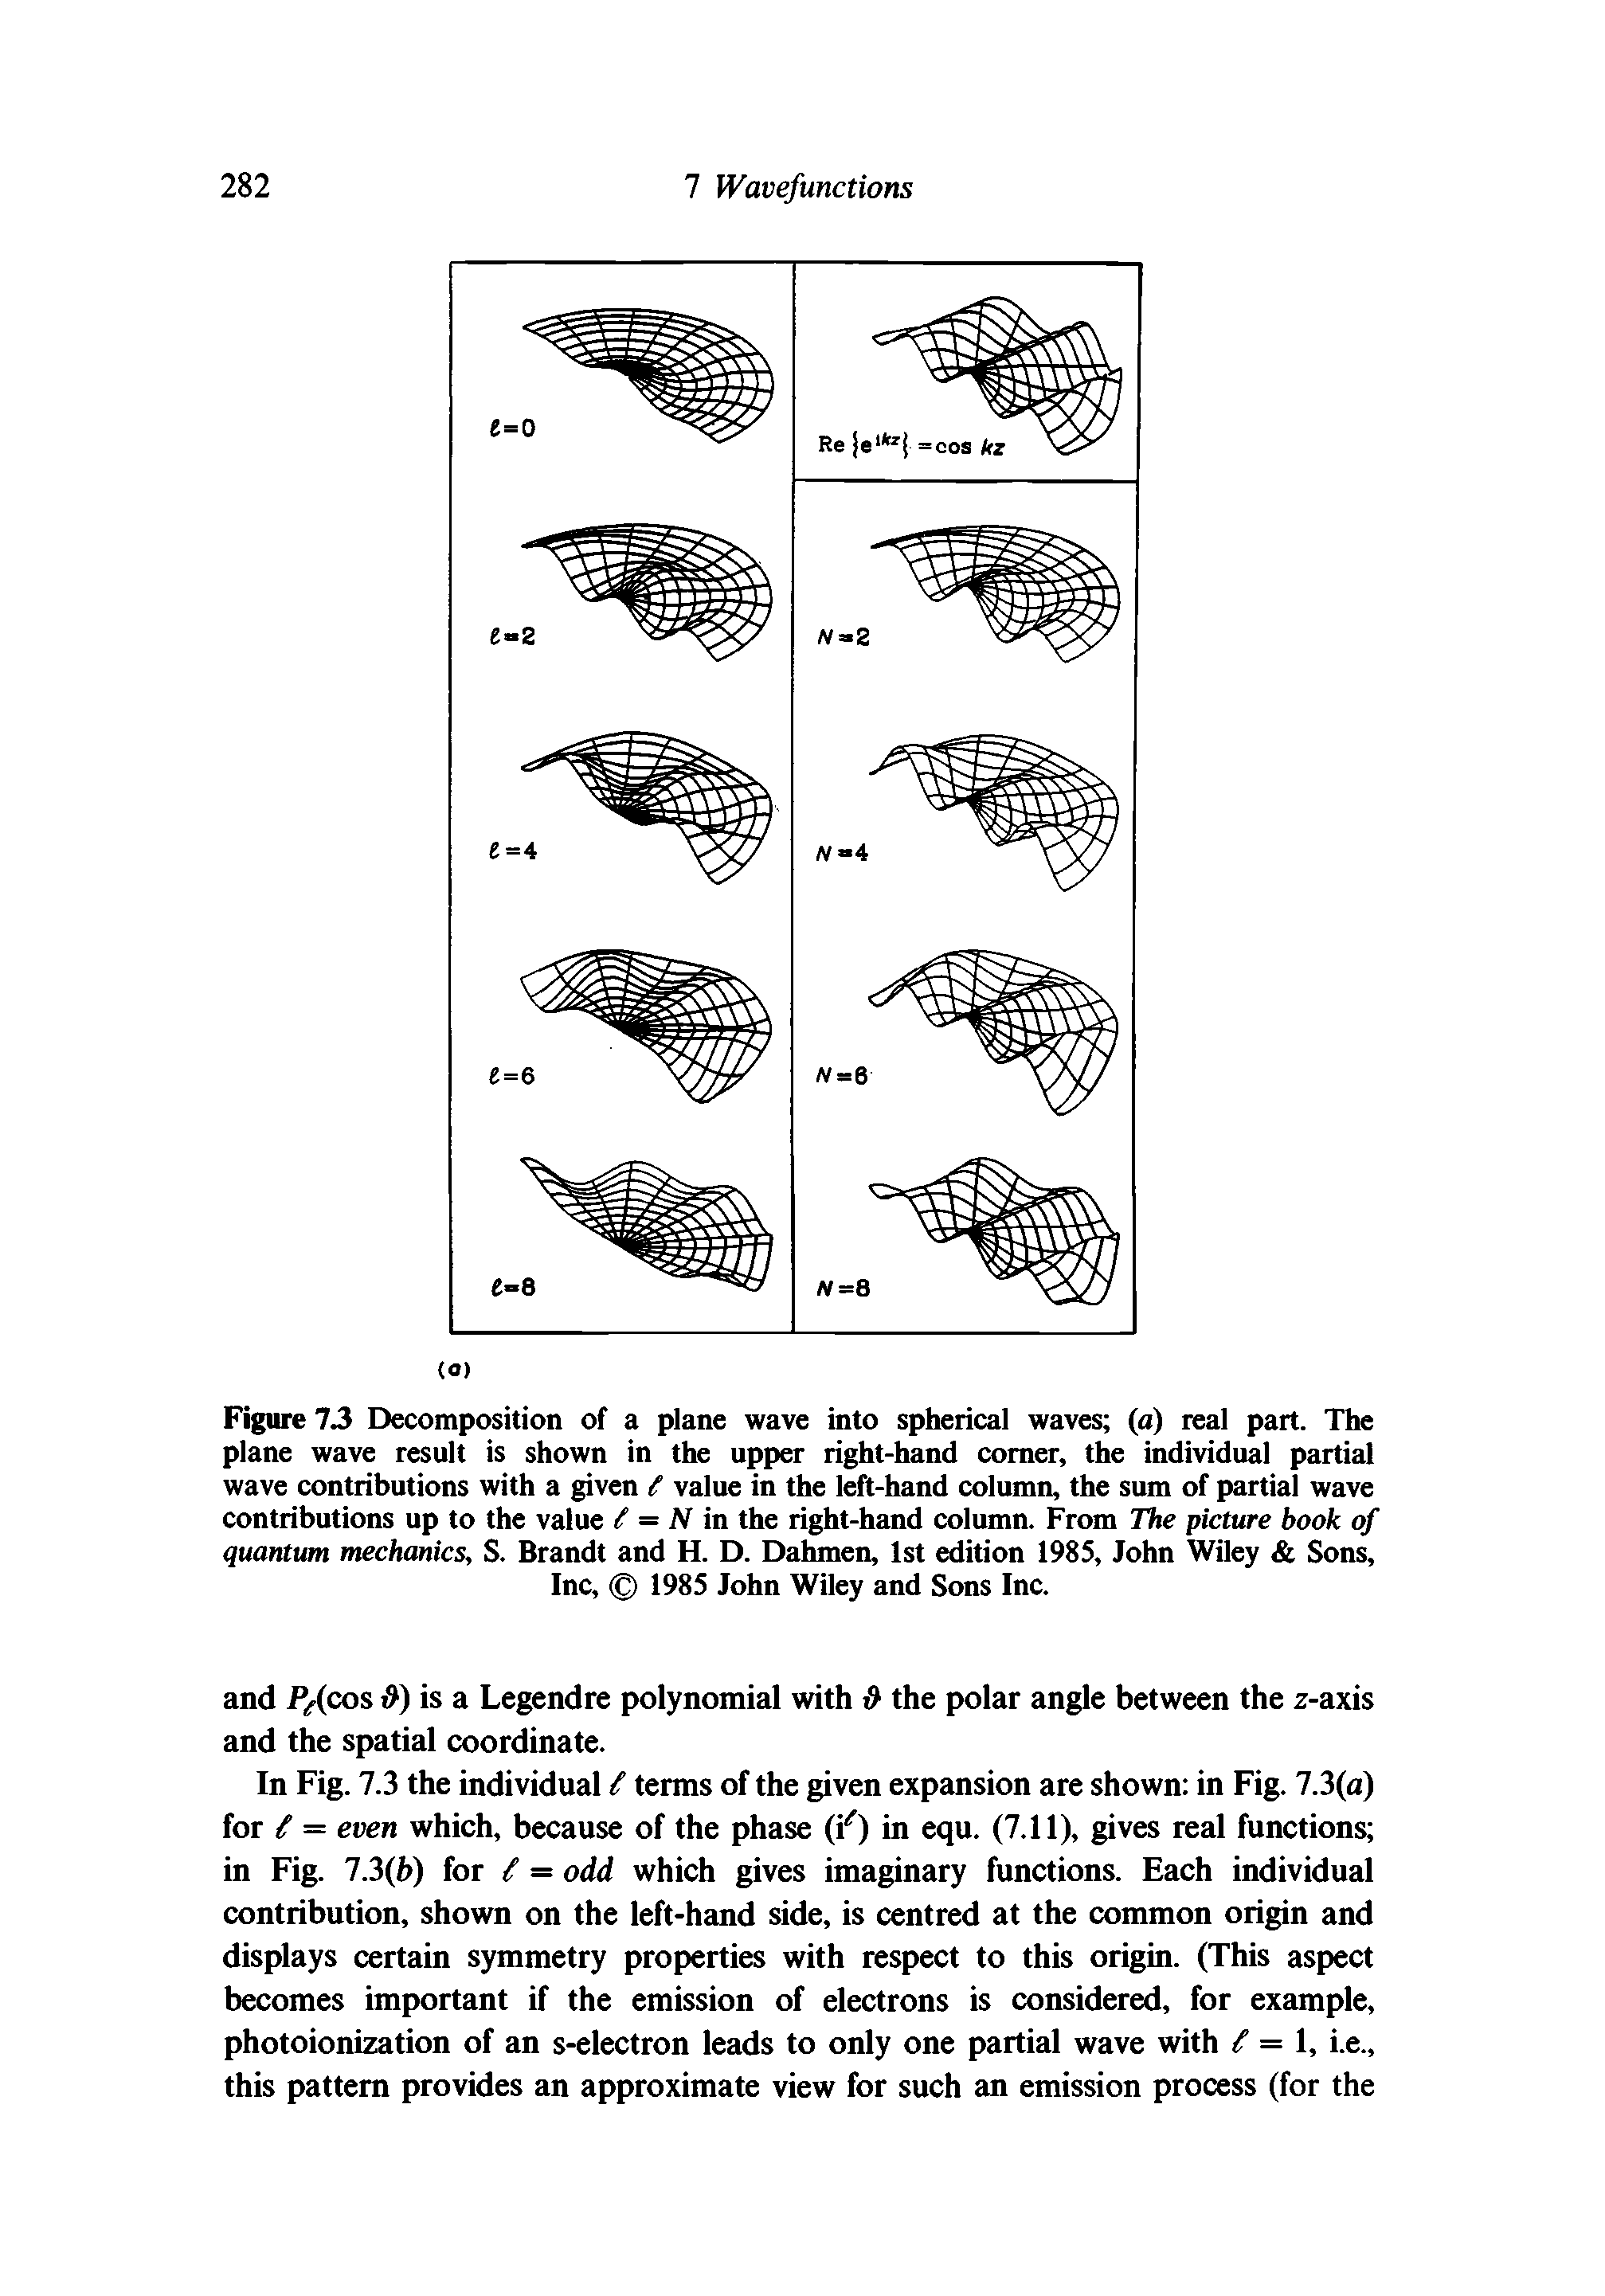 Figure 13 Decomposition of a plane wave into spherical waves (a) real part. The plane wave result is shown in the upper right-hand comer, the individual partial wave contributions with a given ( value in the left-hand column, the sum of partial wave contributions up to the value ( = N in the right-hand column. From The picture book of quantum mechanics, S. Brandt and H. D. Dahmen, 1st edition 1985, John Wiley Sons, Inc, 1985 John Wiley and Sons Inc.